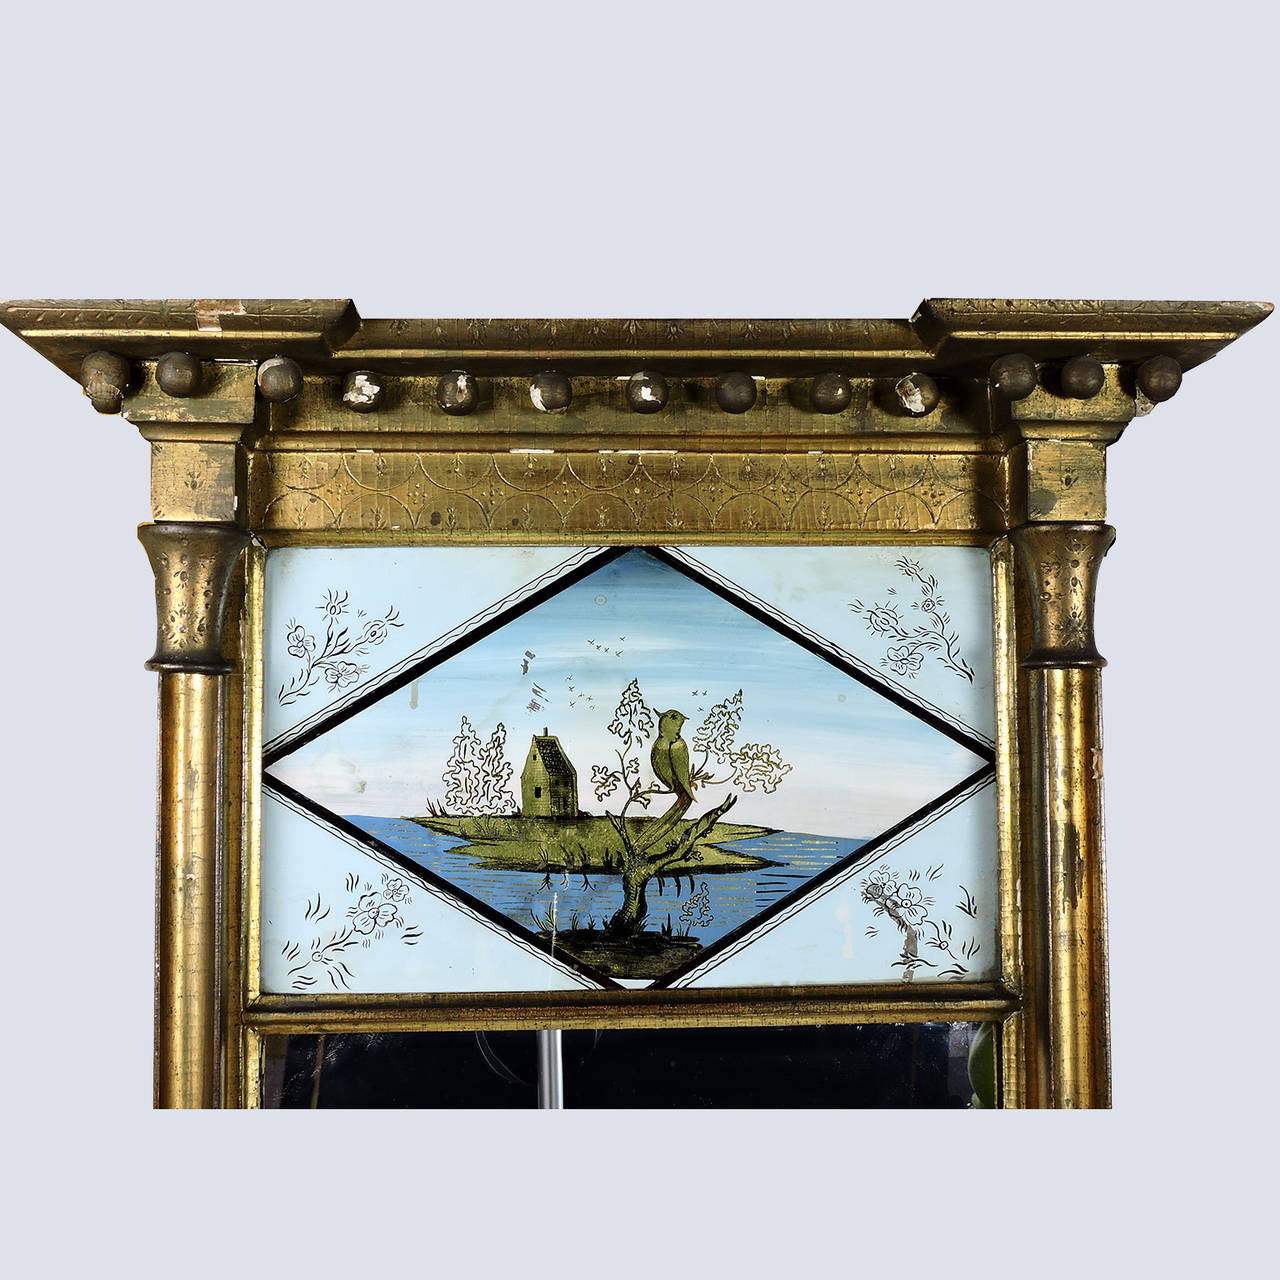 Federal carved giltwood églomisé wall mirror, circa 1800. The églomisé reverse paint gilt decoration of a bird in tree with a house on an island in the background. 
Dimensions: Height: 44 1/2 inches, width of cornice: 25 inches.